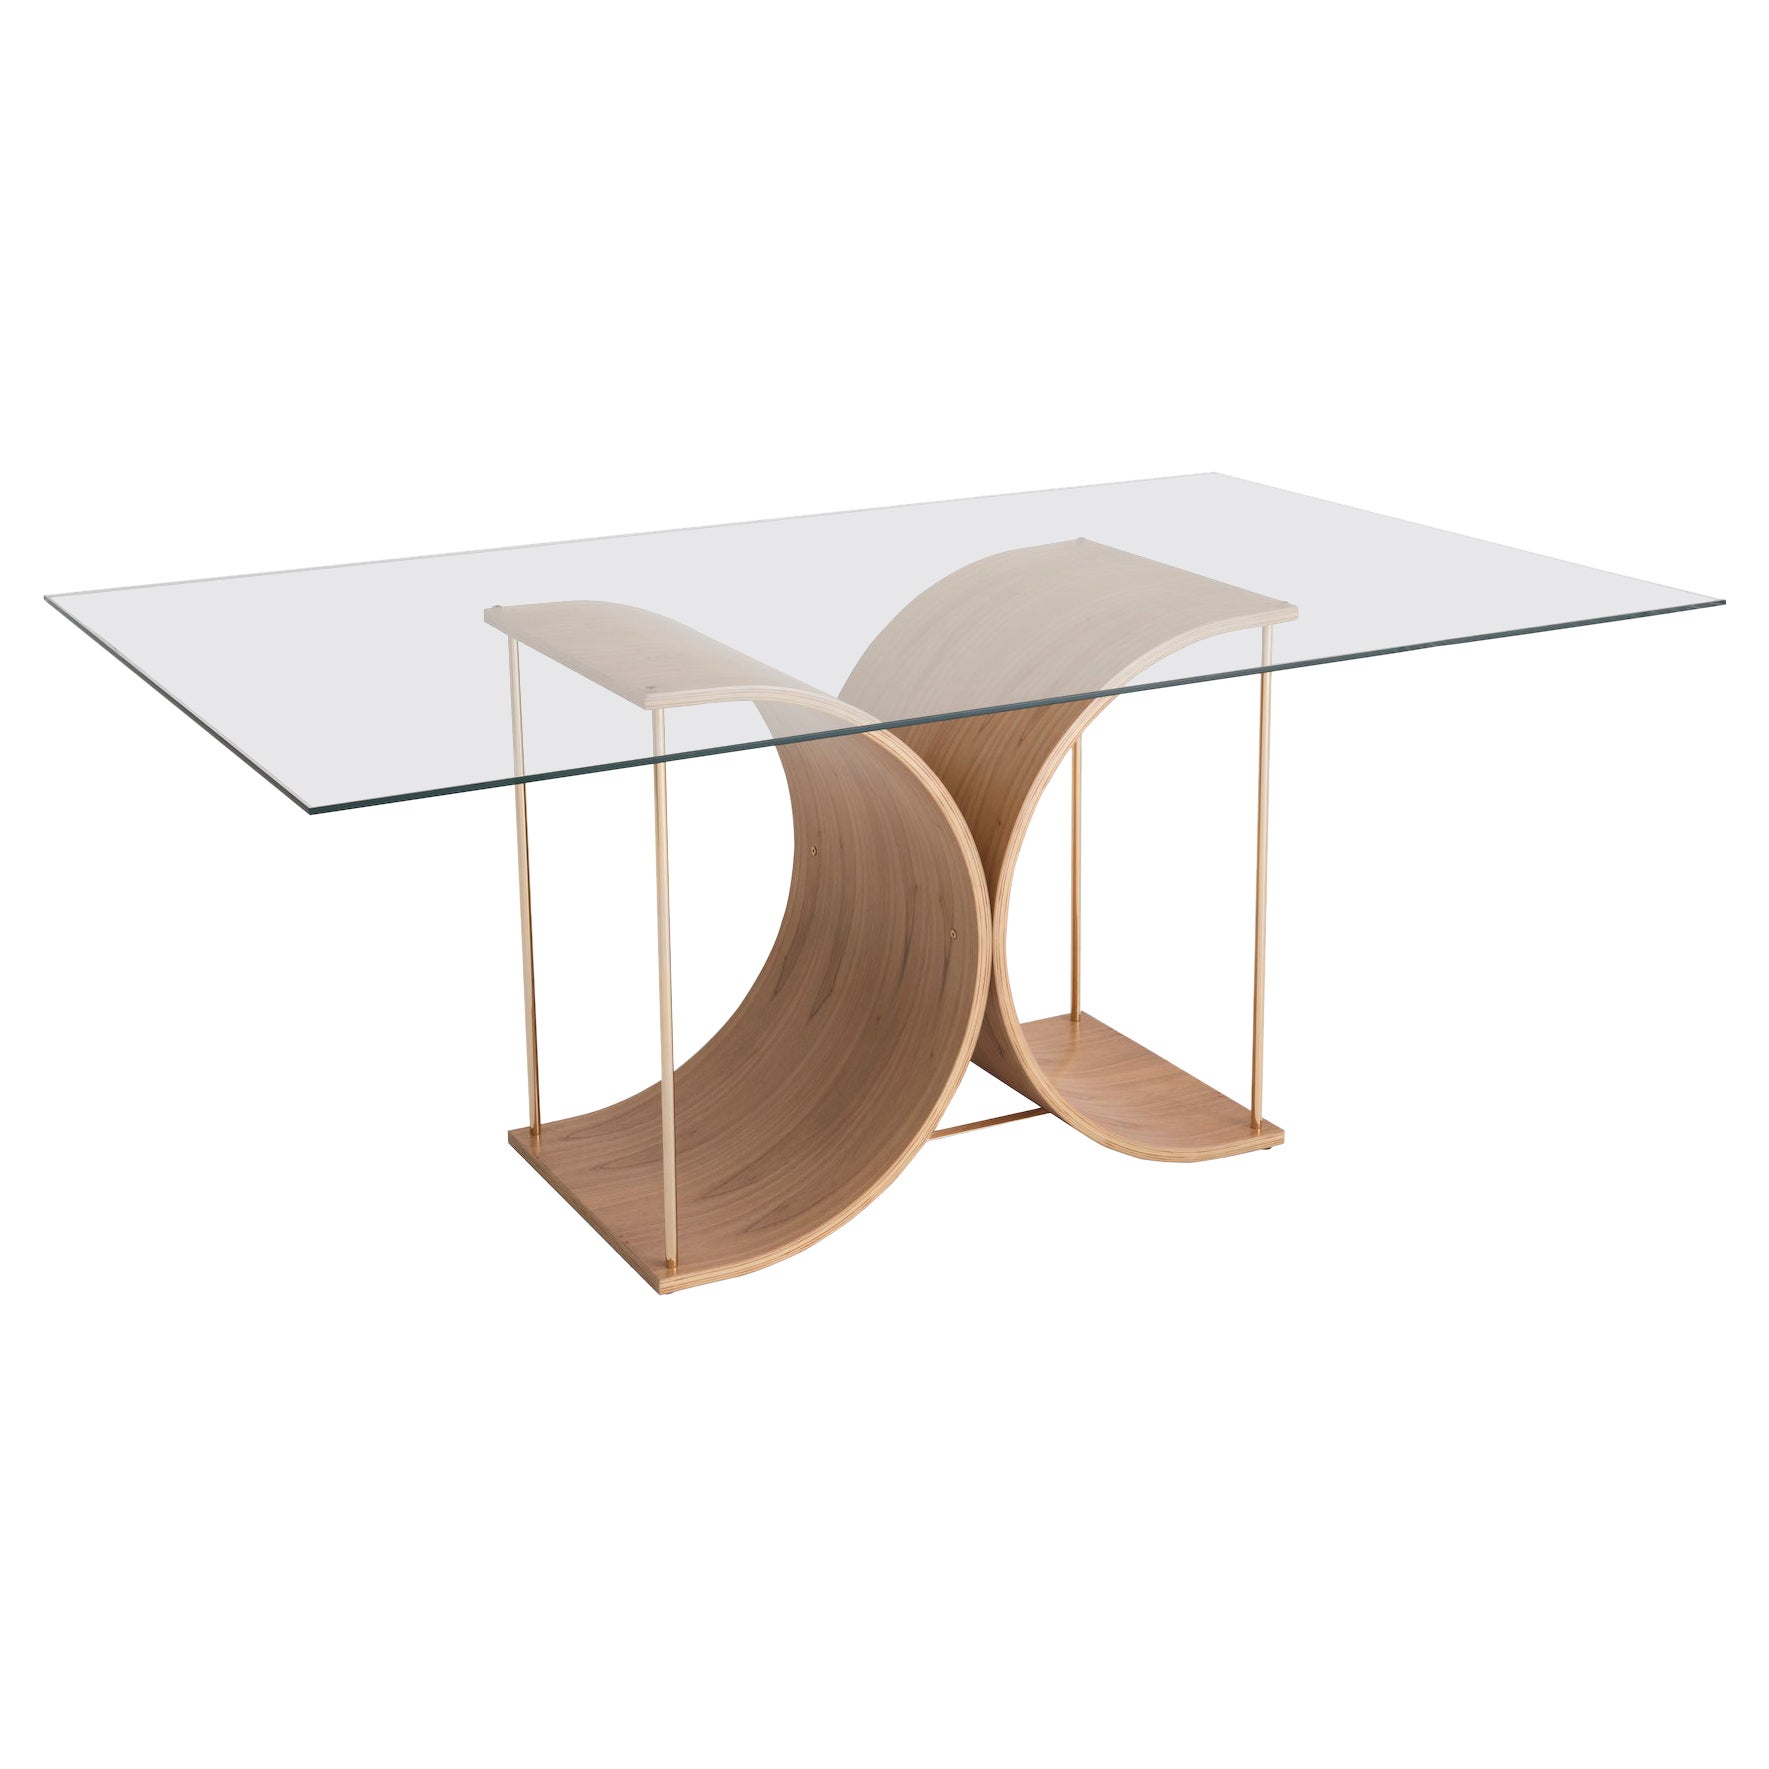 "Regia" Base of Dining Table in Curved Cinnamon Natural Wood Multi-laminate 